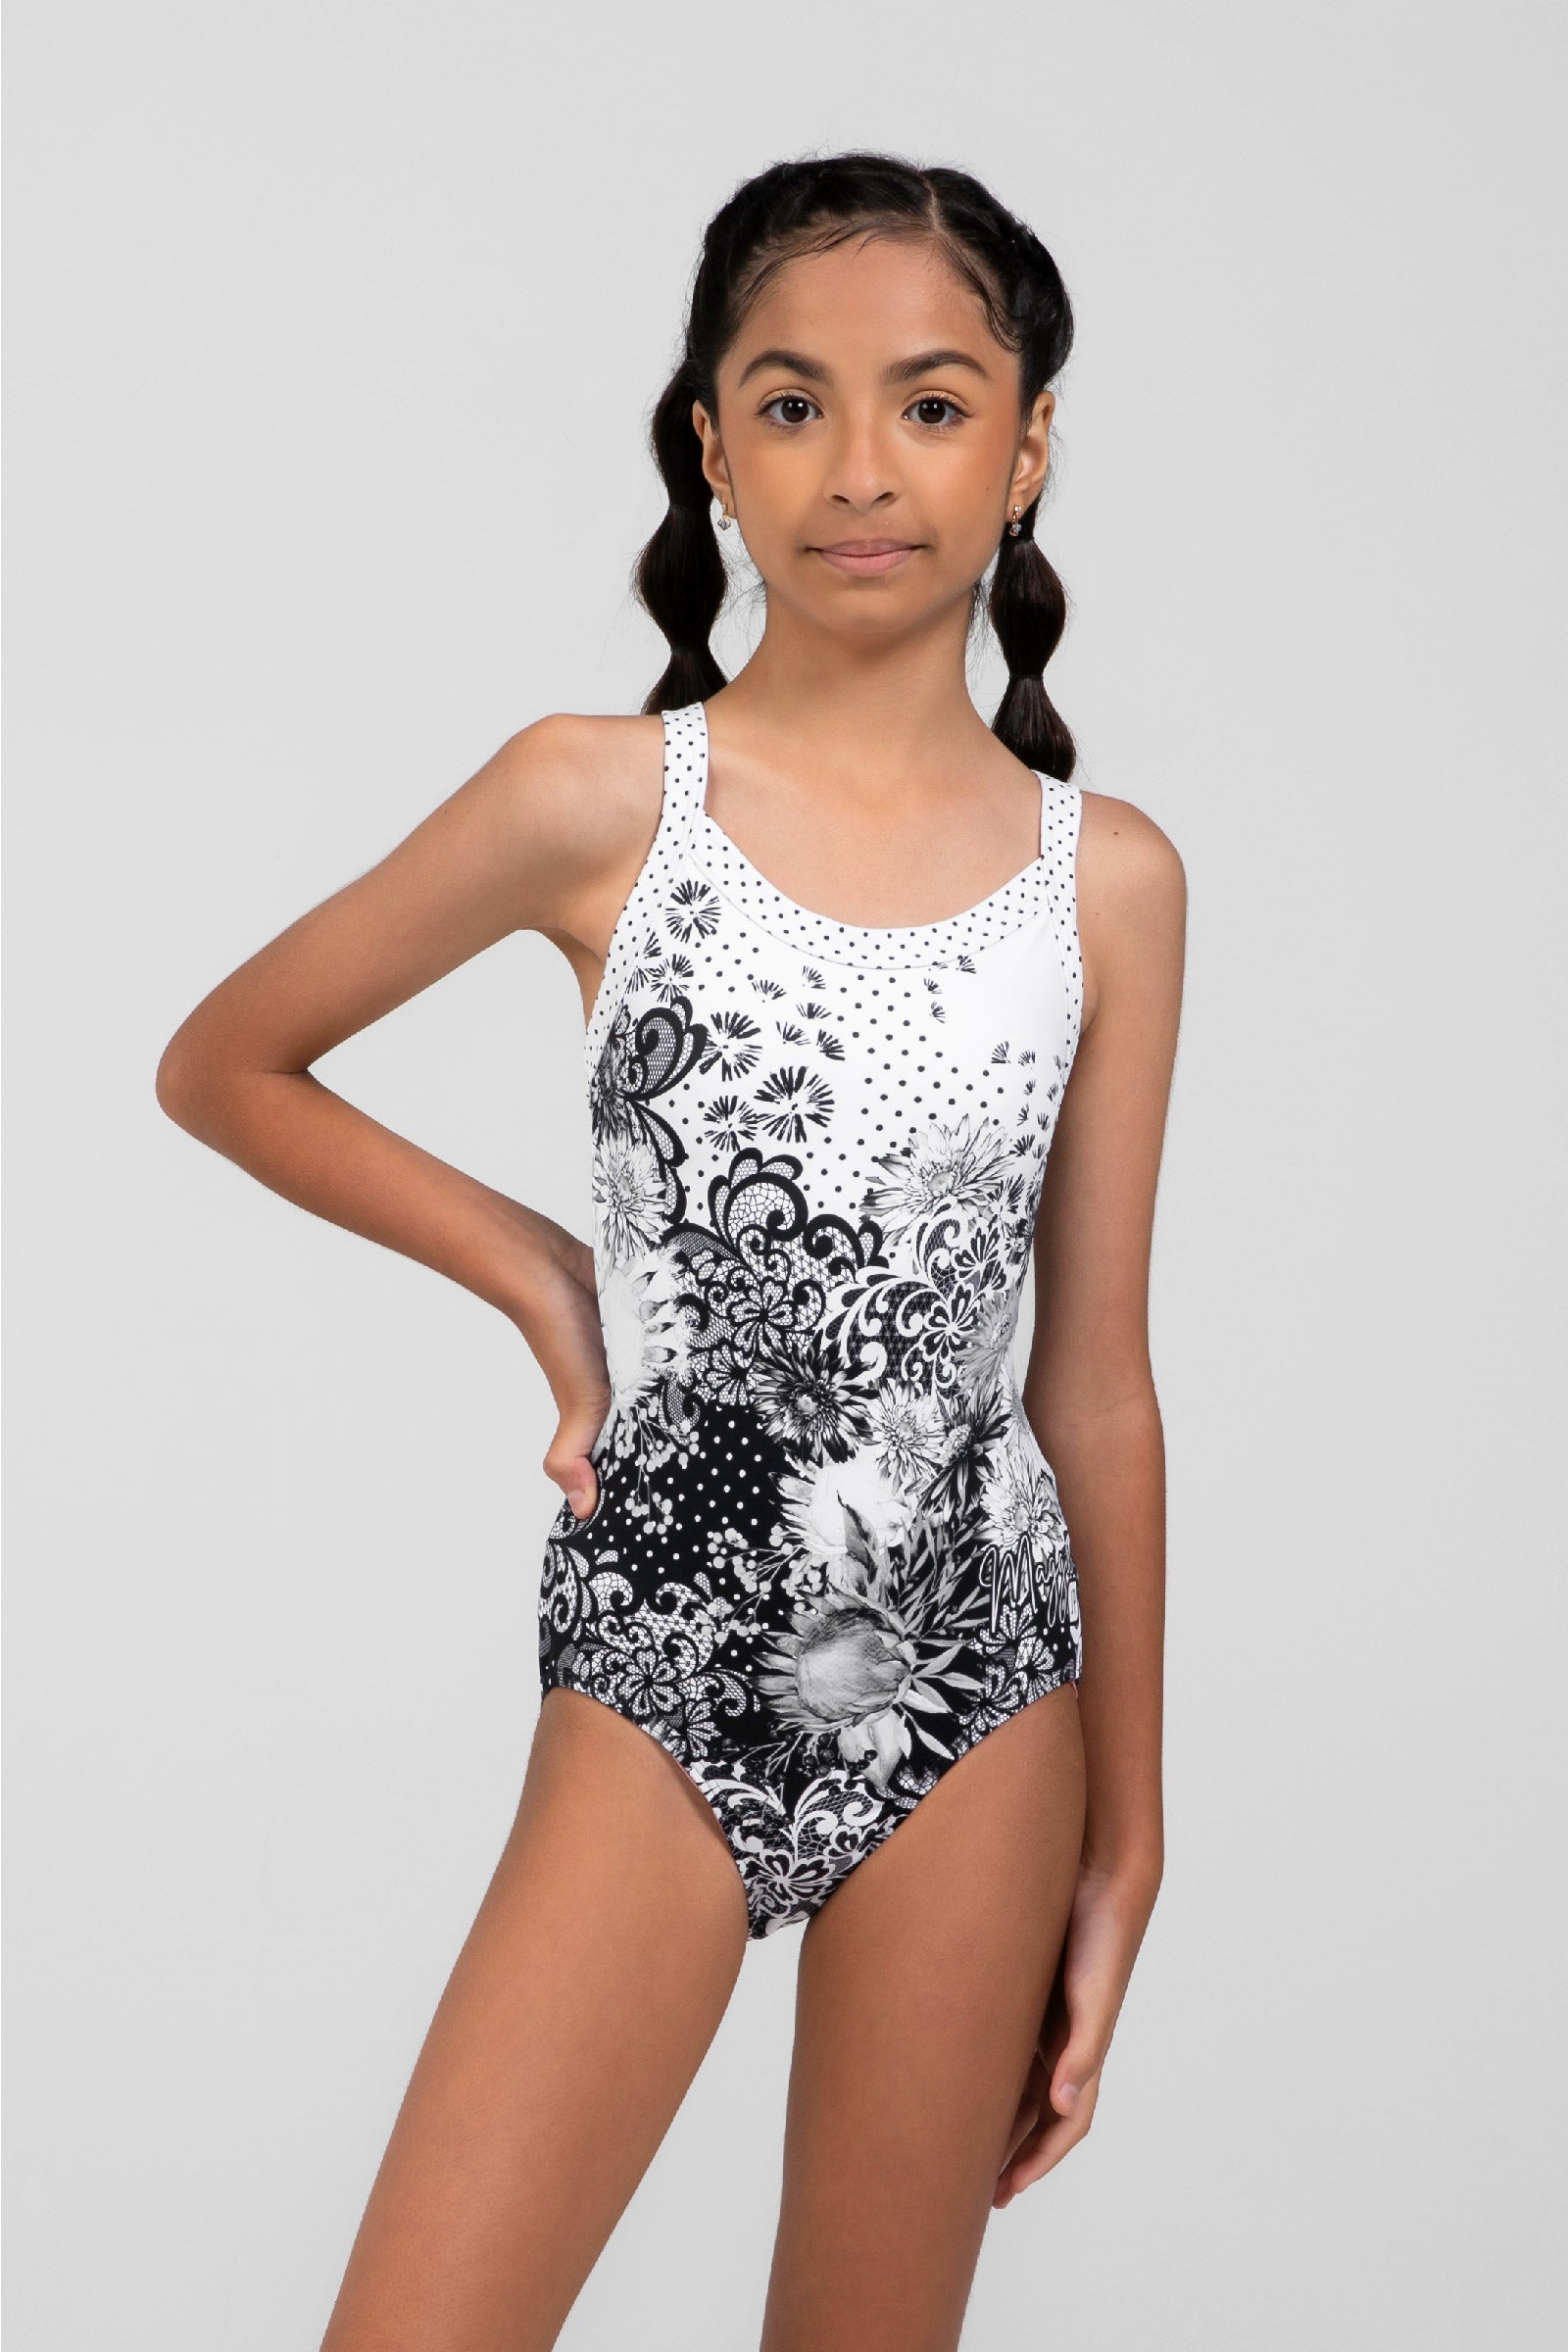 Be Bold, Be Confident Leotard